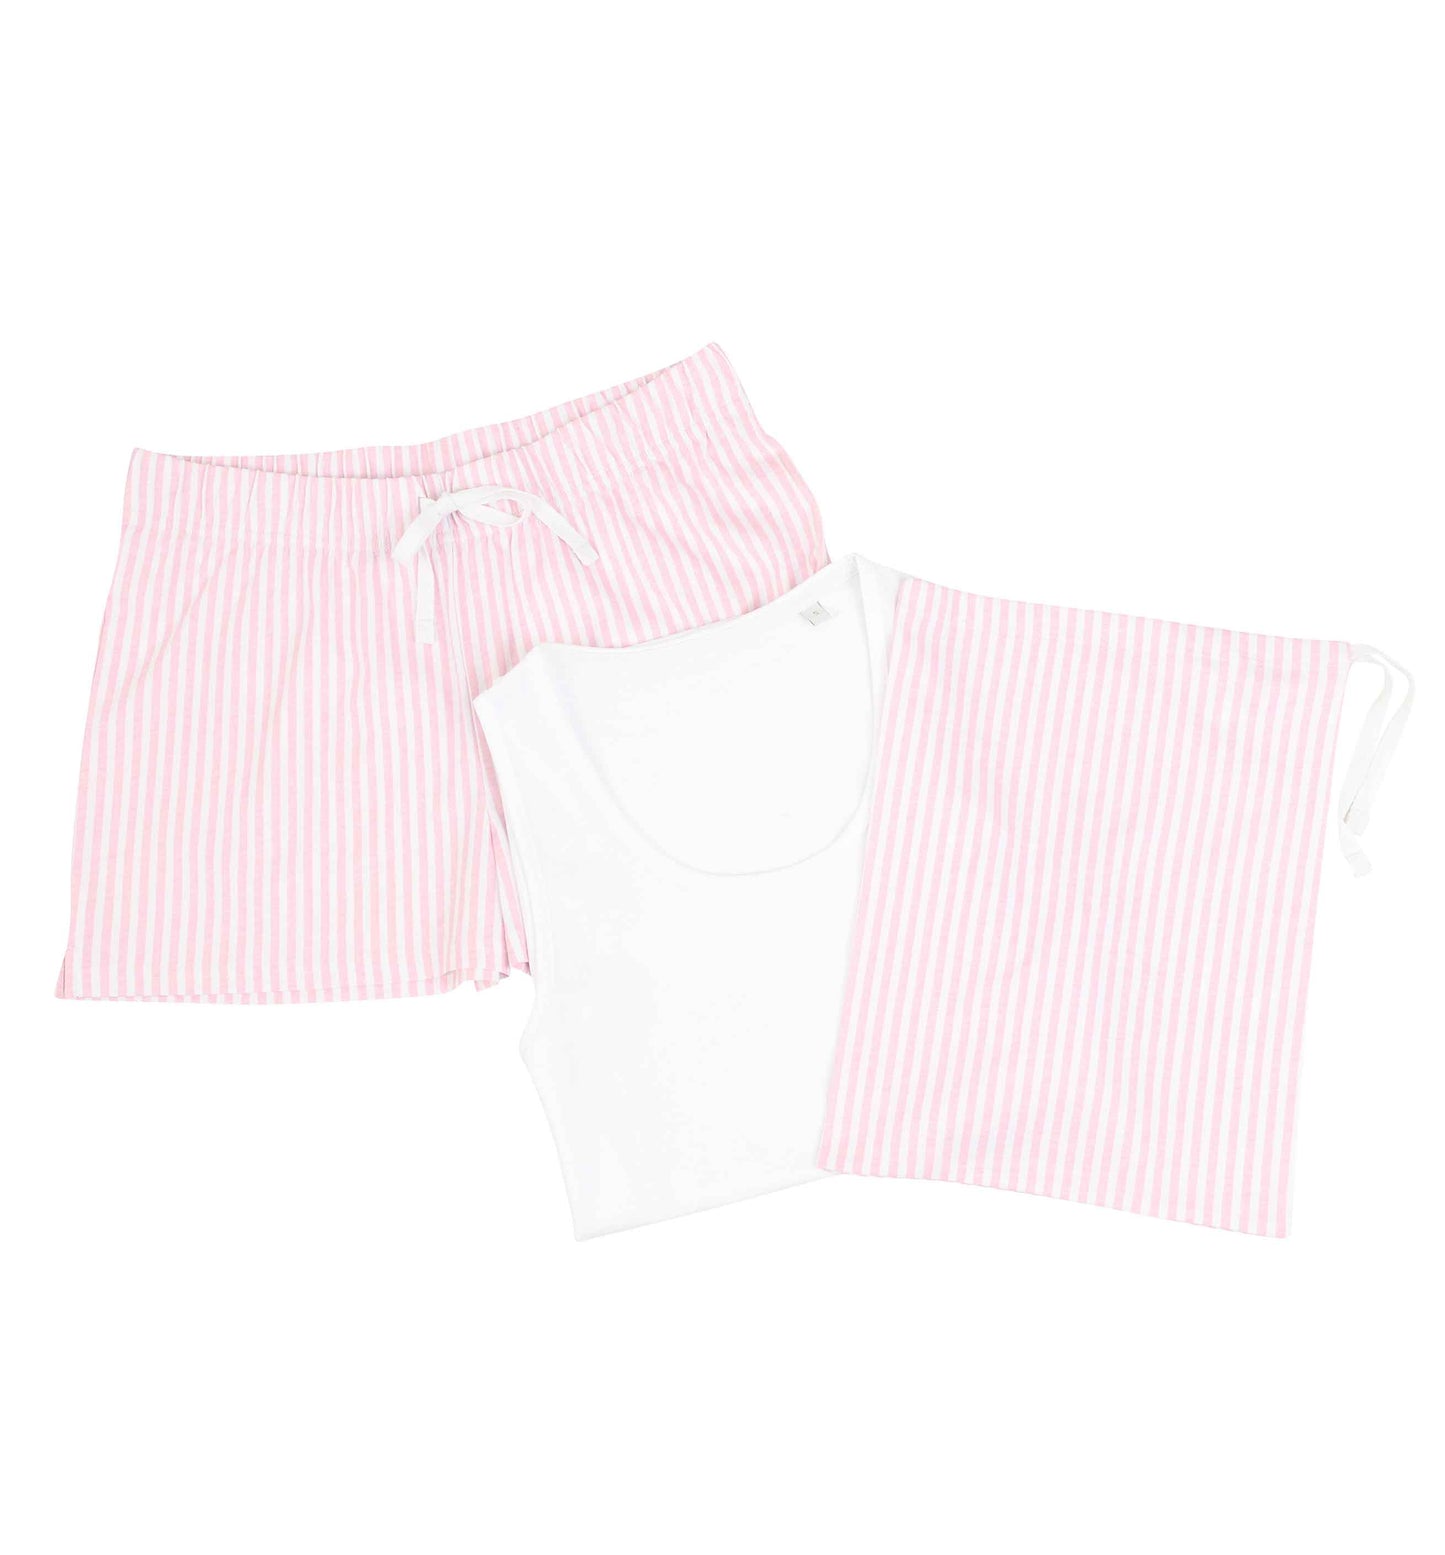 Happy Mother's day love from the bump - blue | Pyjama shorts set